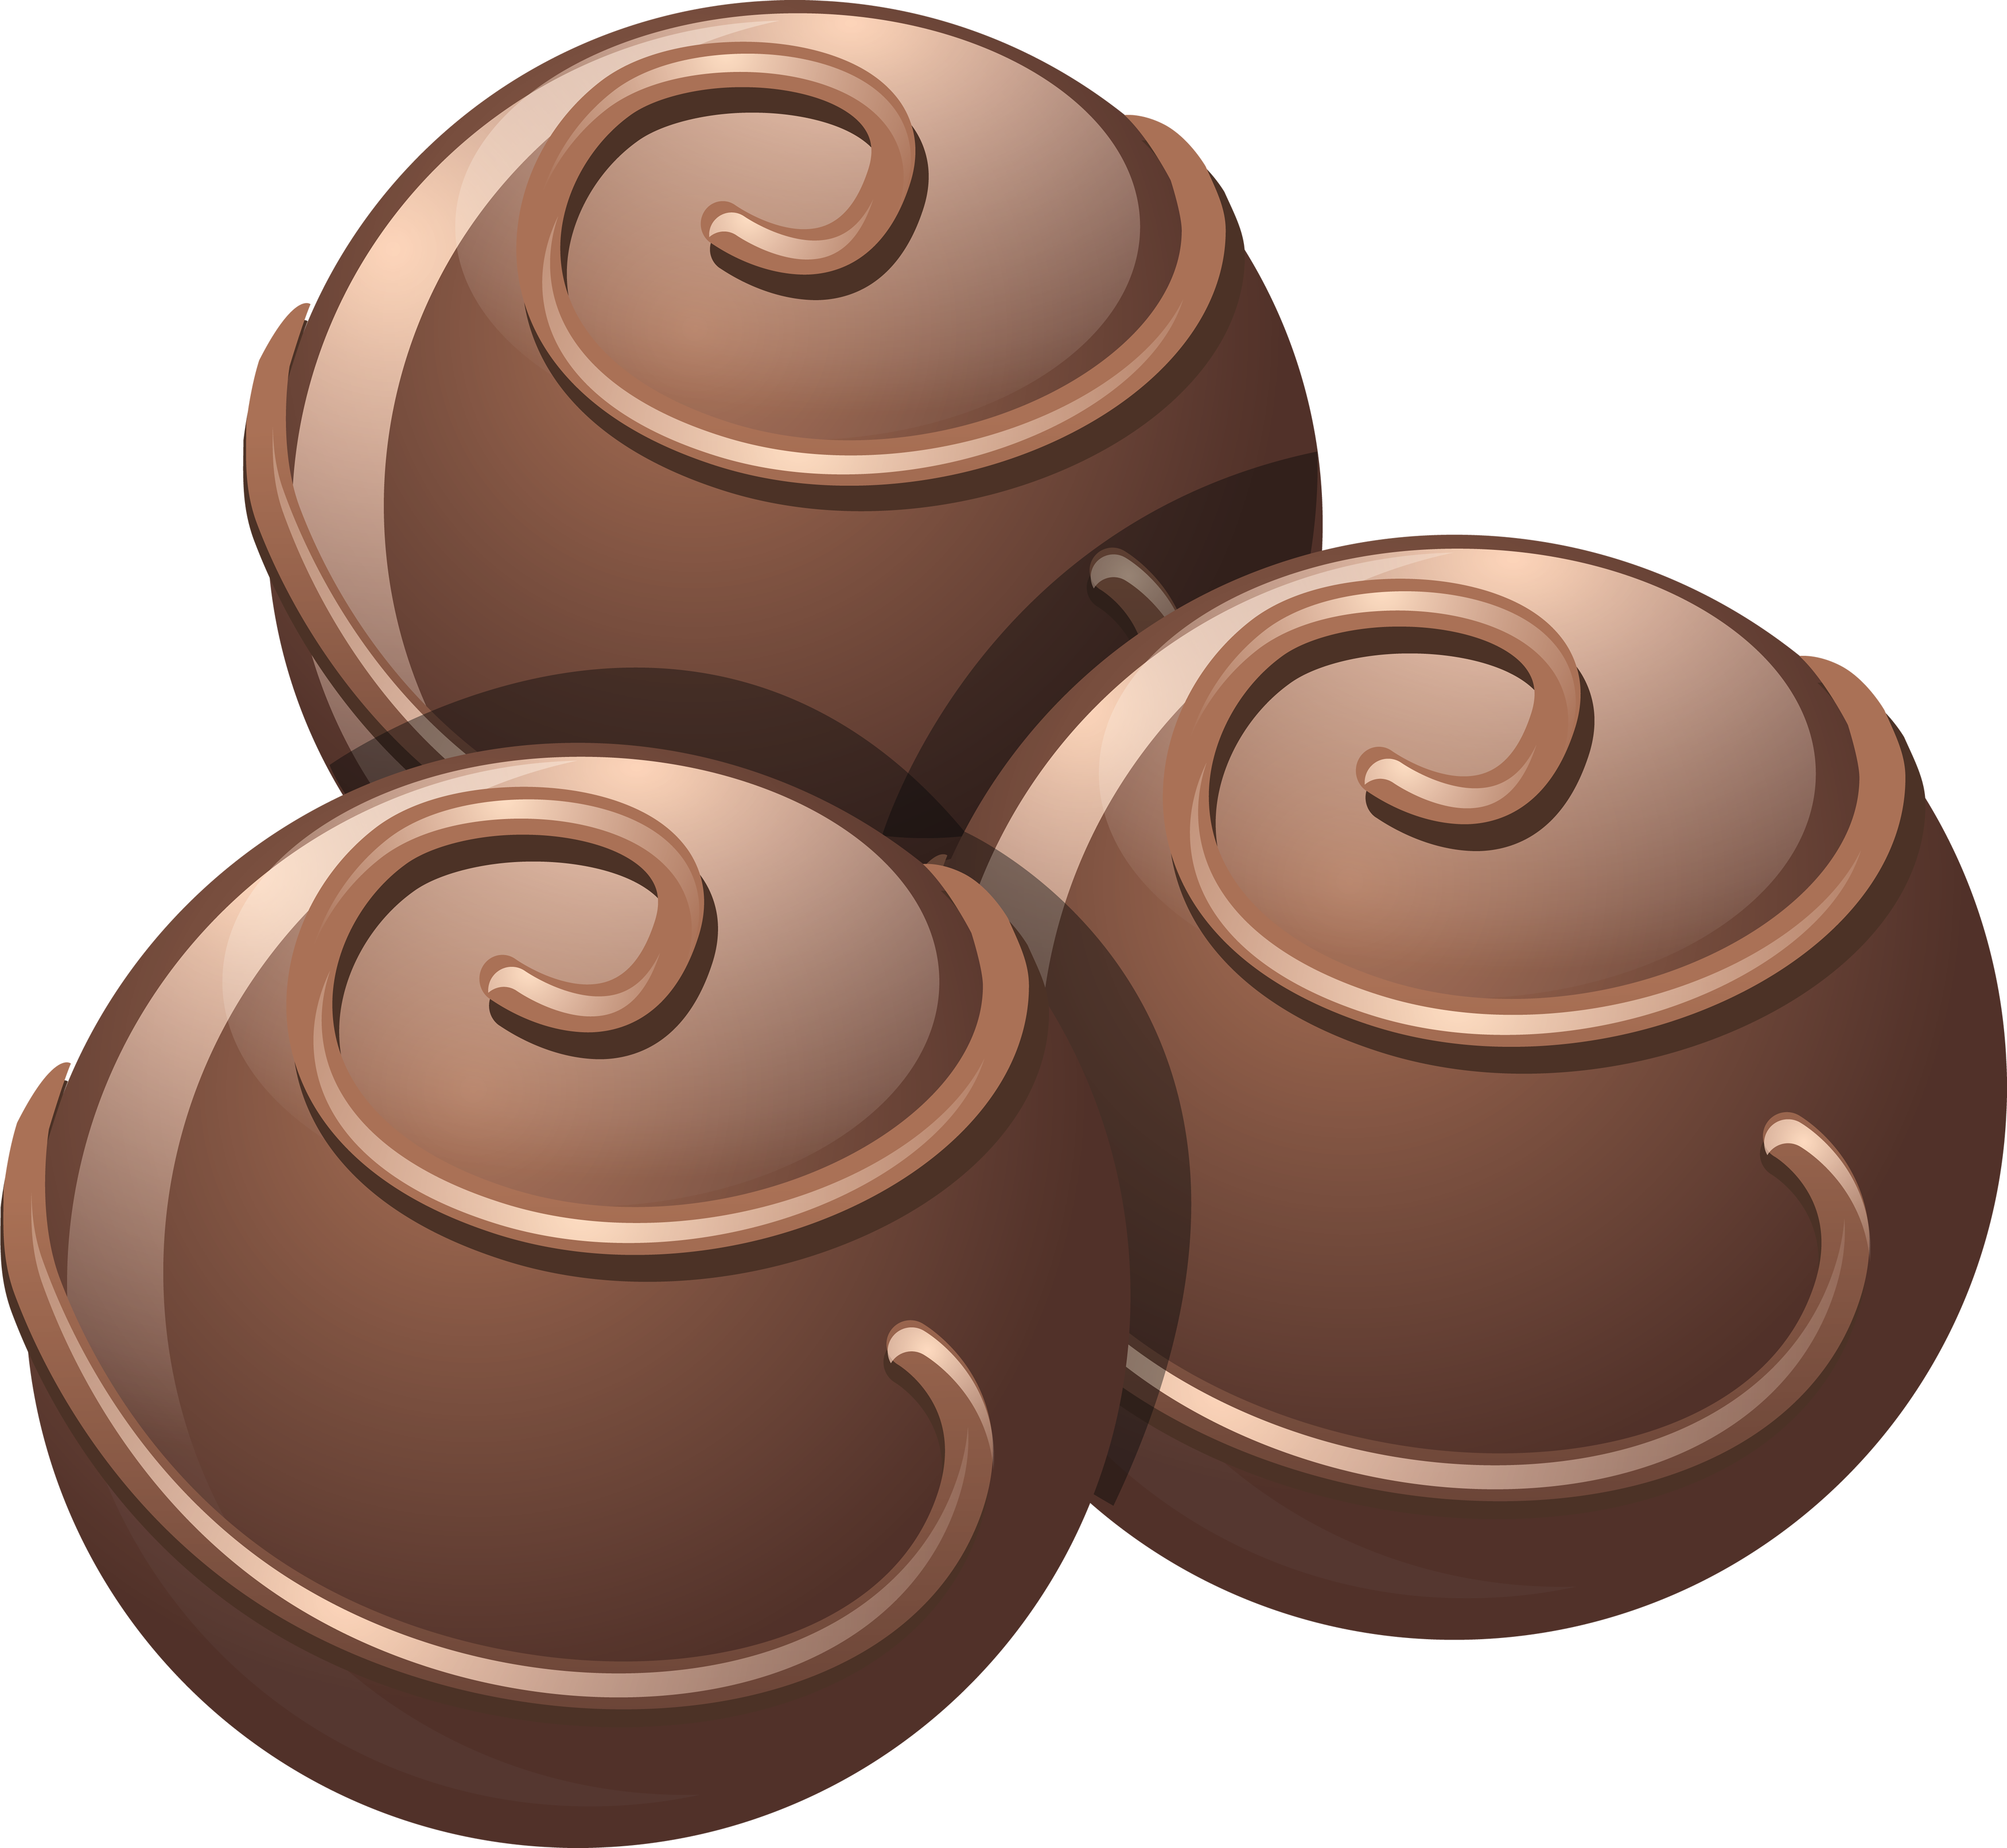 Chocolate Images Chocolate Pictures Download Png Image Clipart